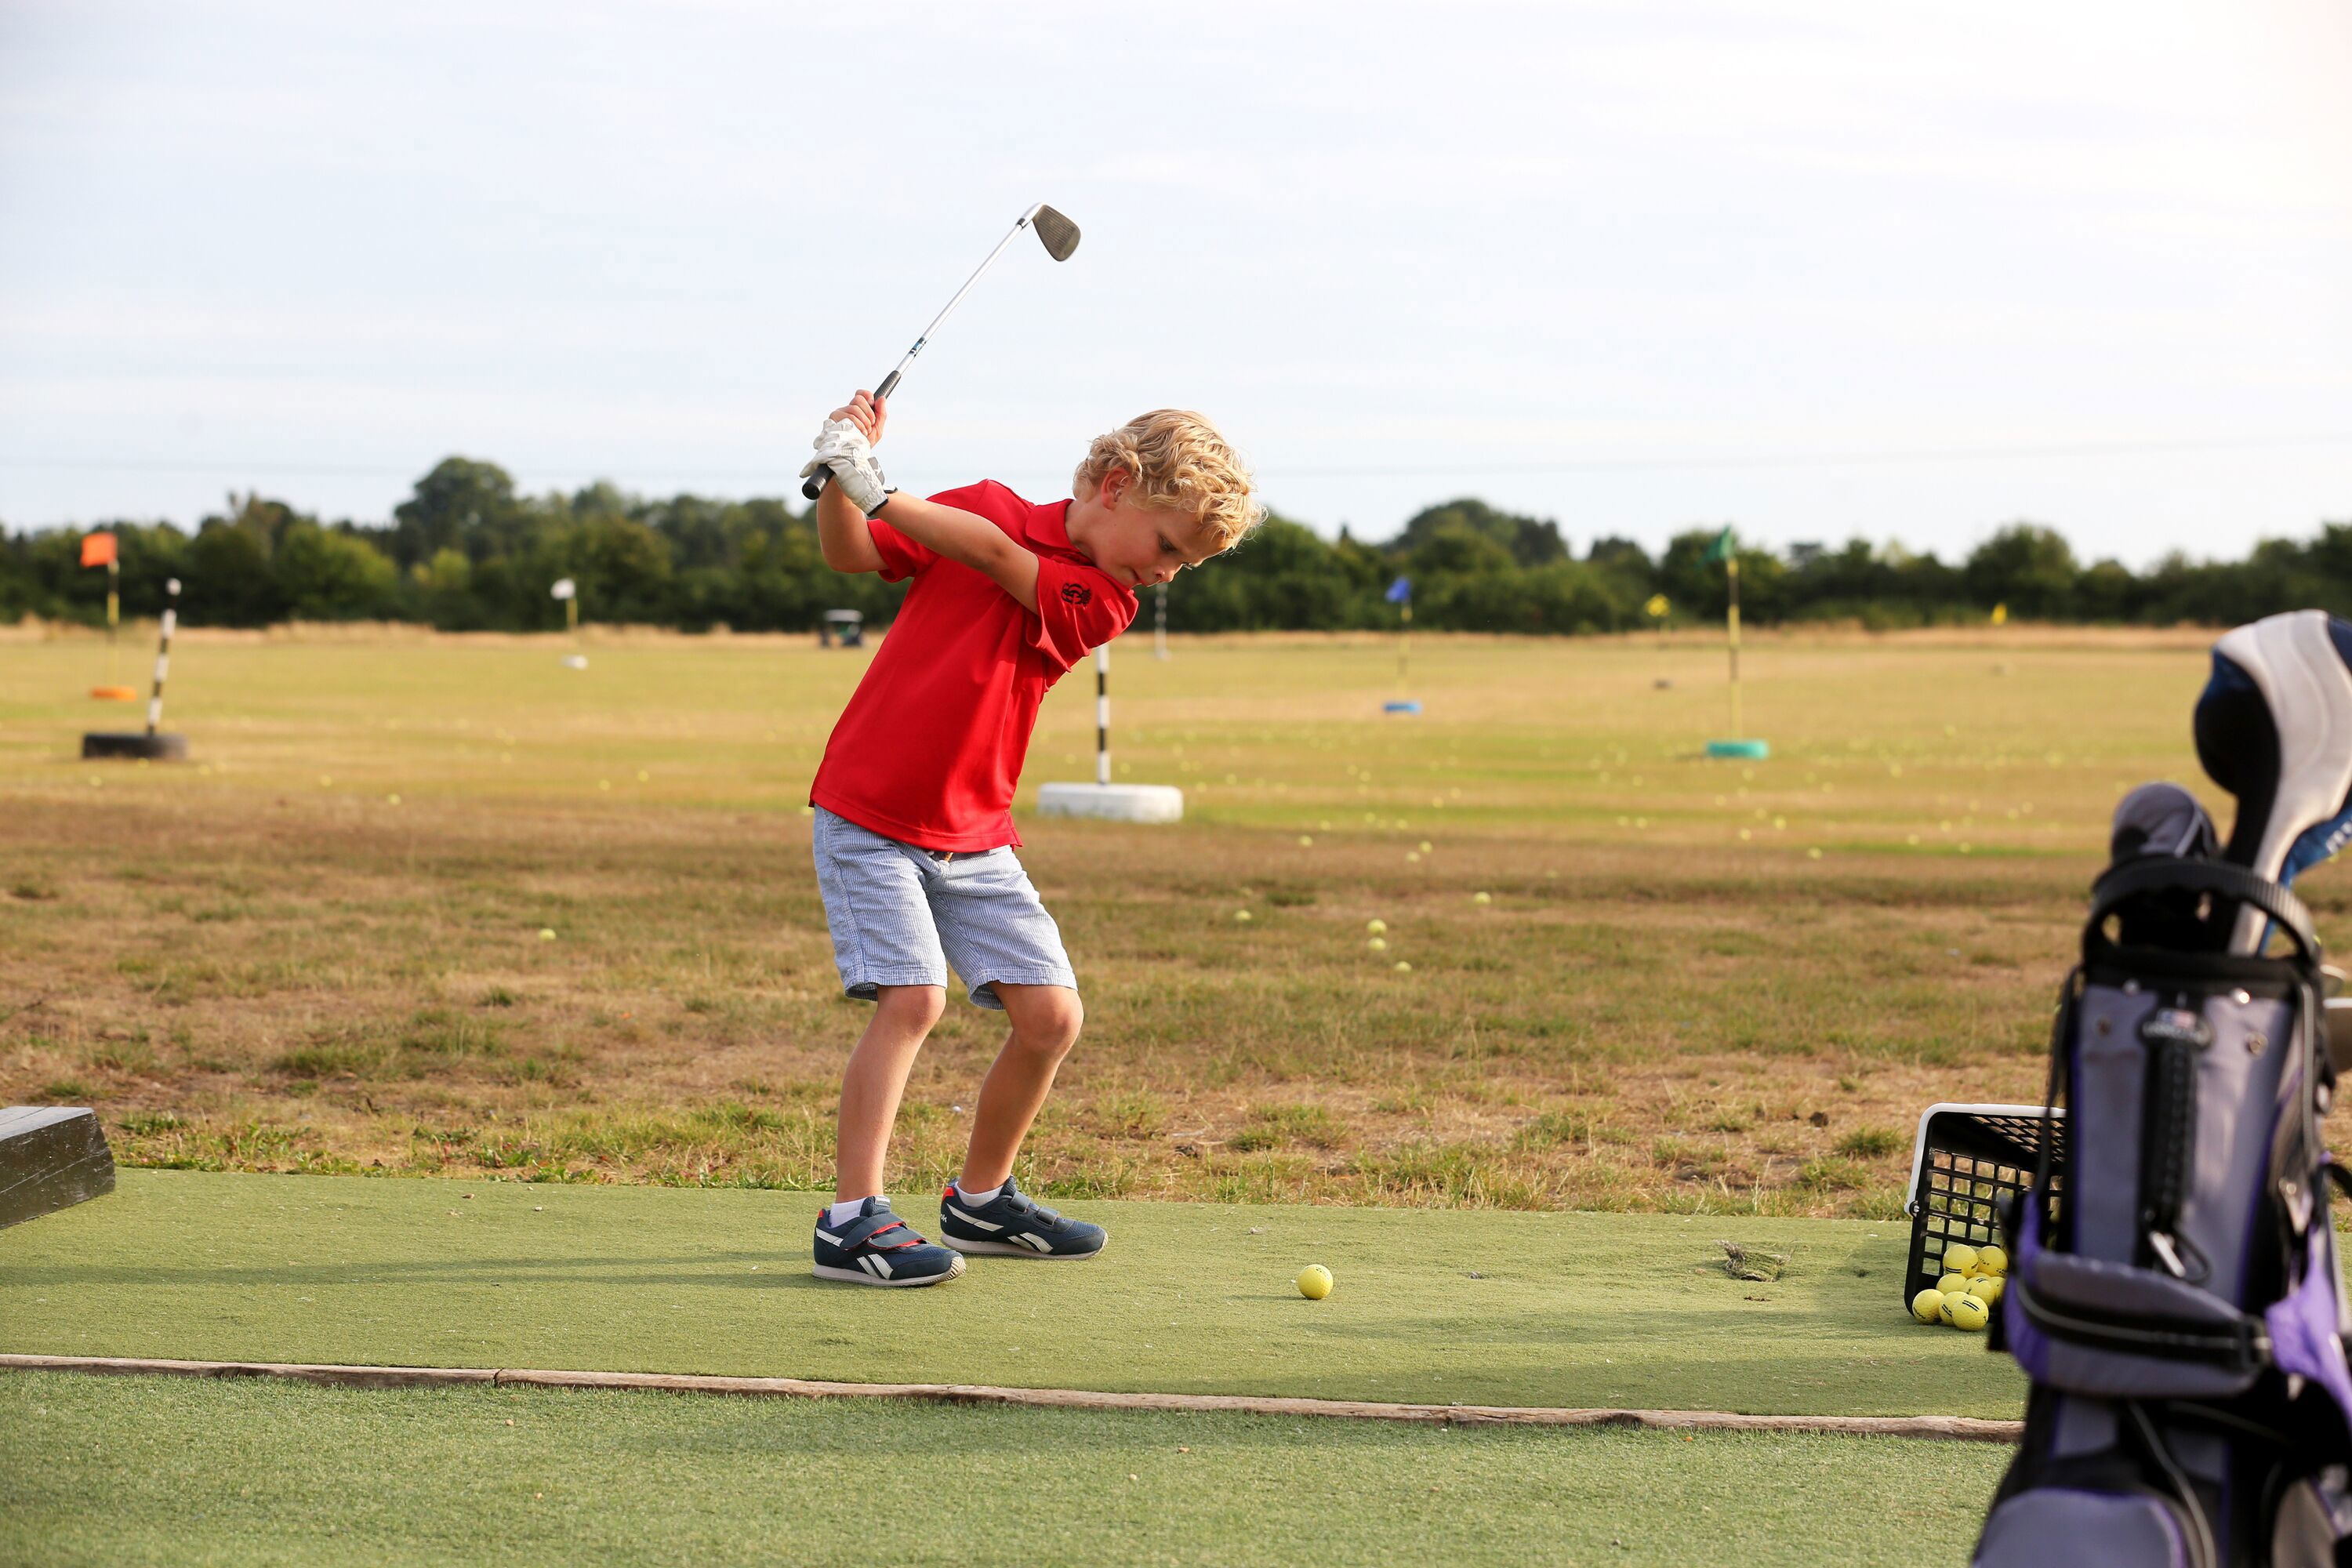 General views of Level Up action at Goodwood Golf, West Sussex. 18th July 2019...Pictured is action from the day including photography with professional golfer Meghan MacLaren...Photograph by Sam Stephenson, 07880 703135, www.samstephenson.co.uk.